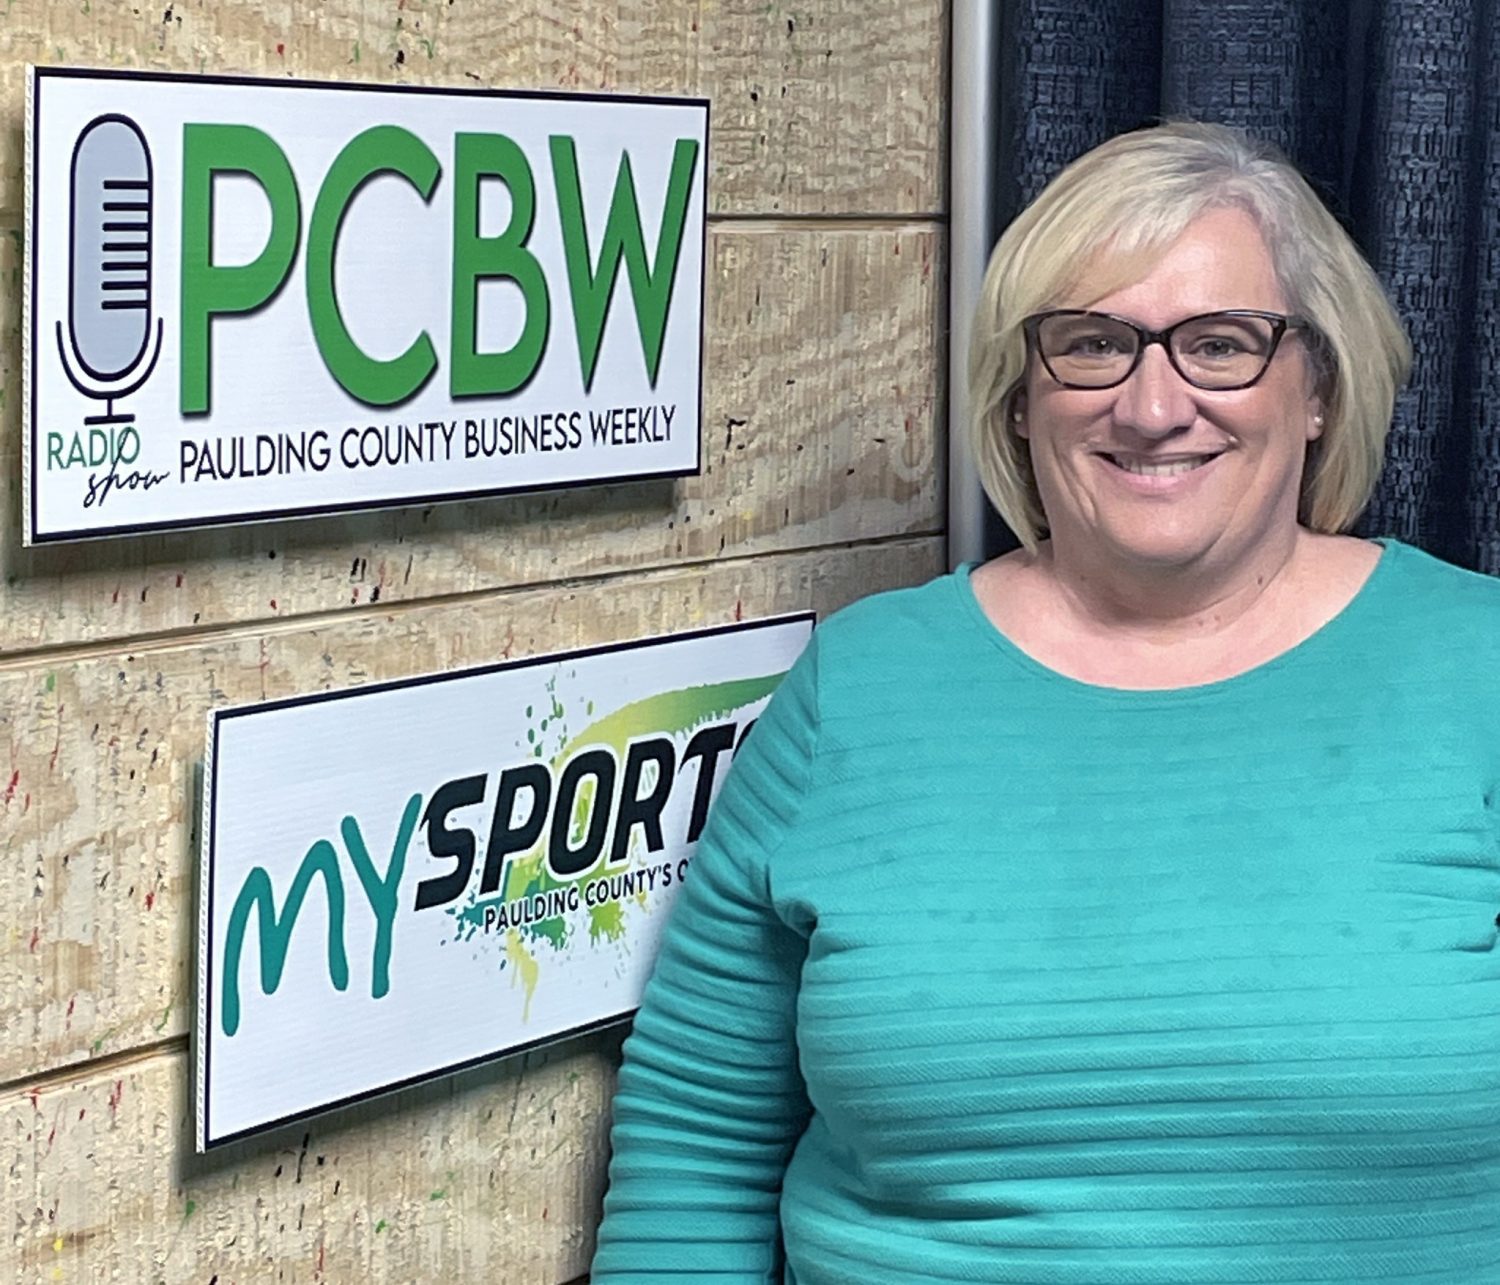 Next guest on Paulding County Business Weekly: Vantage Career Center